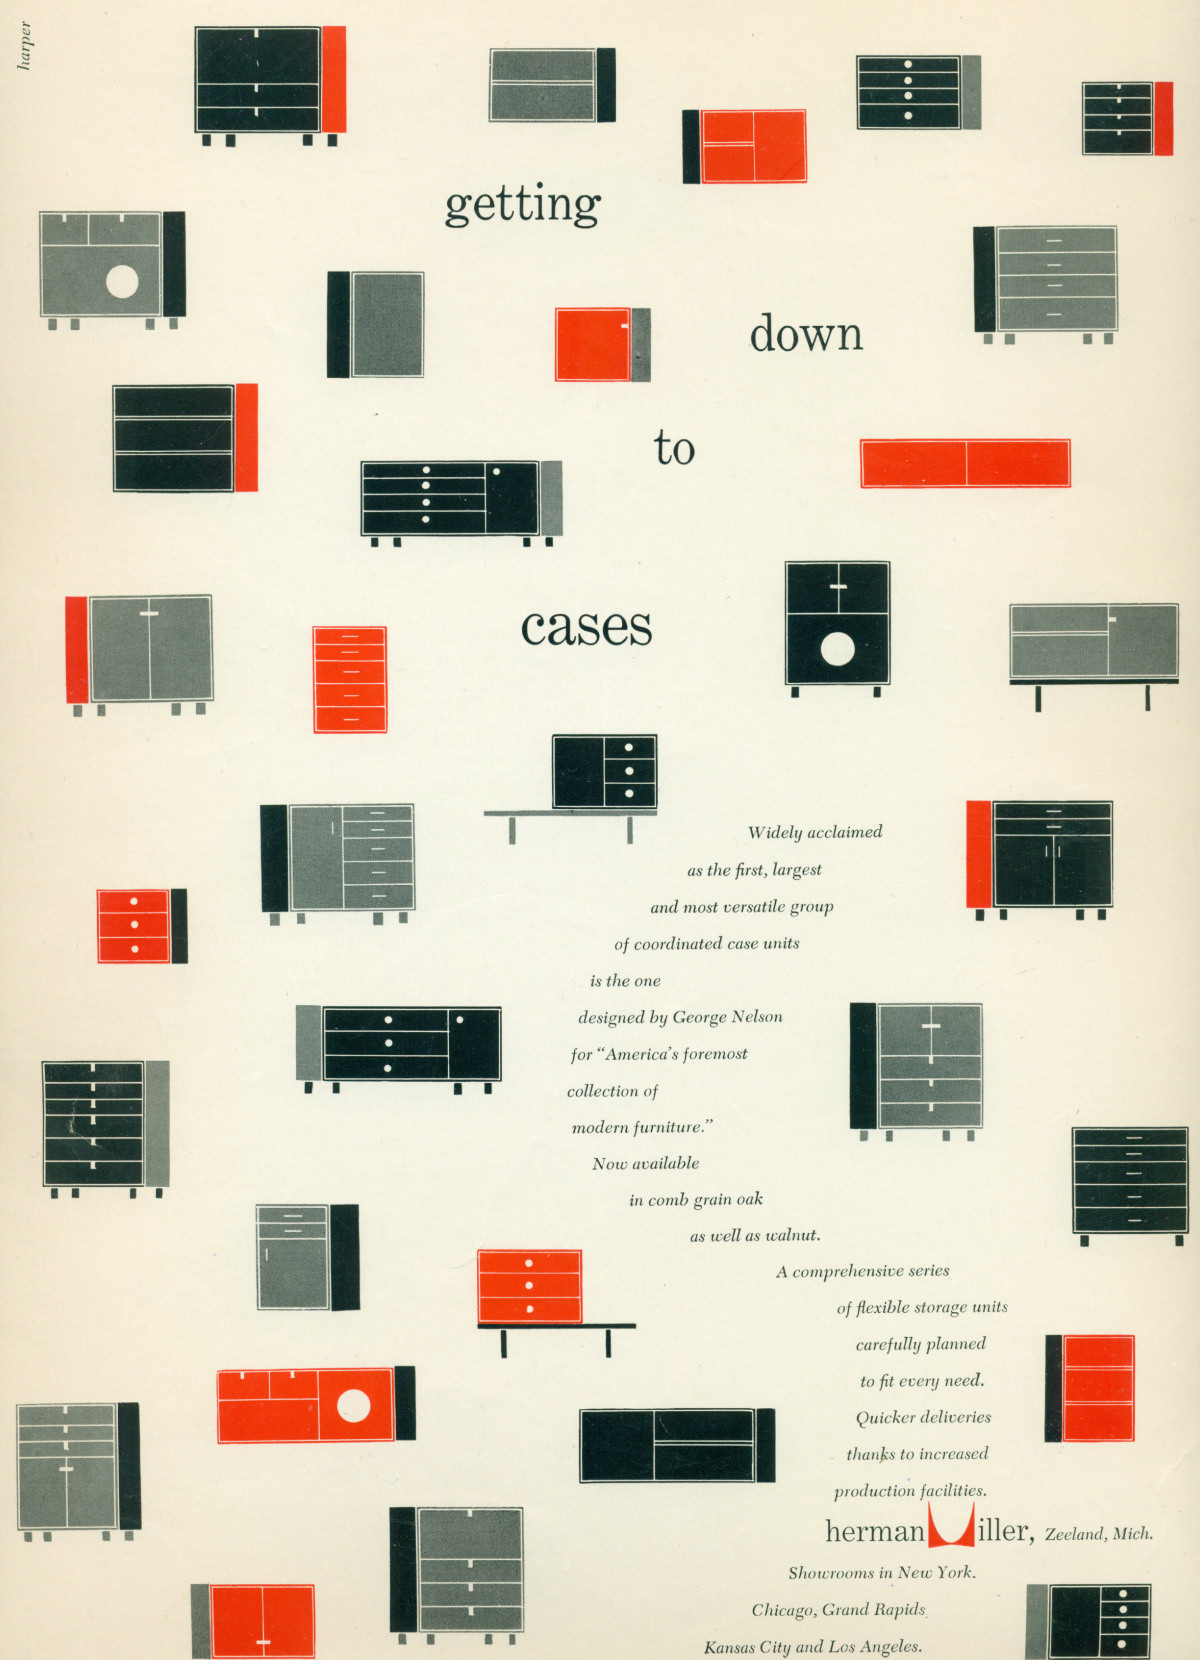 Red, black, and gray graphic renderings of various combinations of the Nelson Basic Cabinet Series surround promotional text that curves through the advertisement.